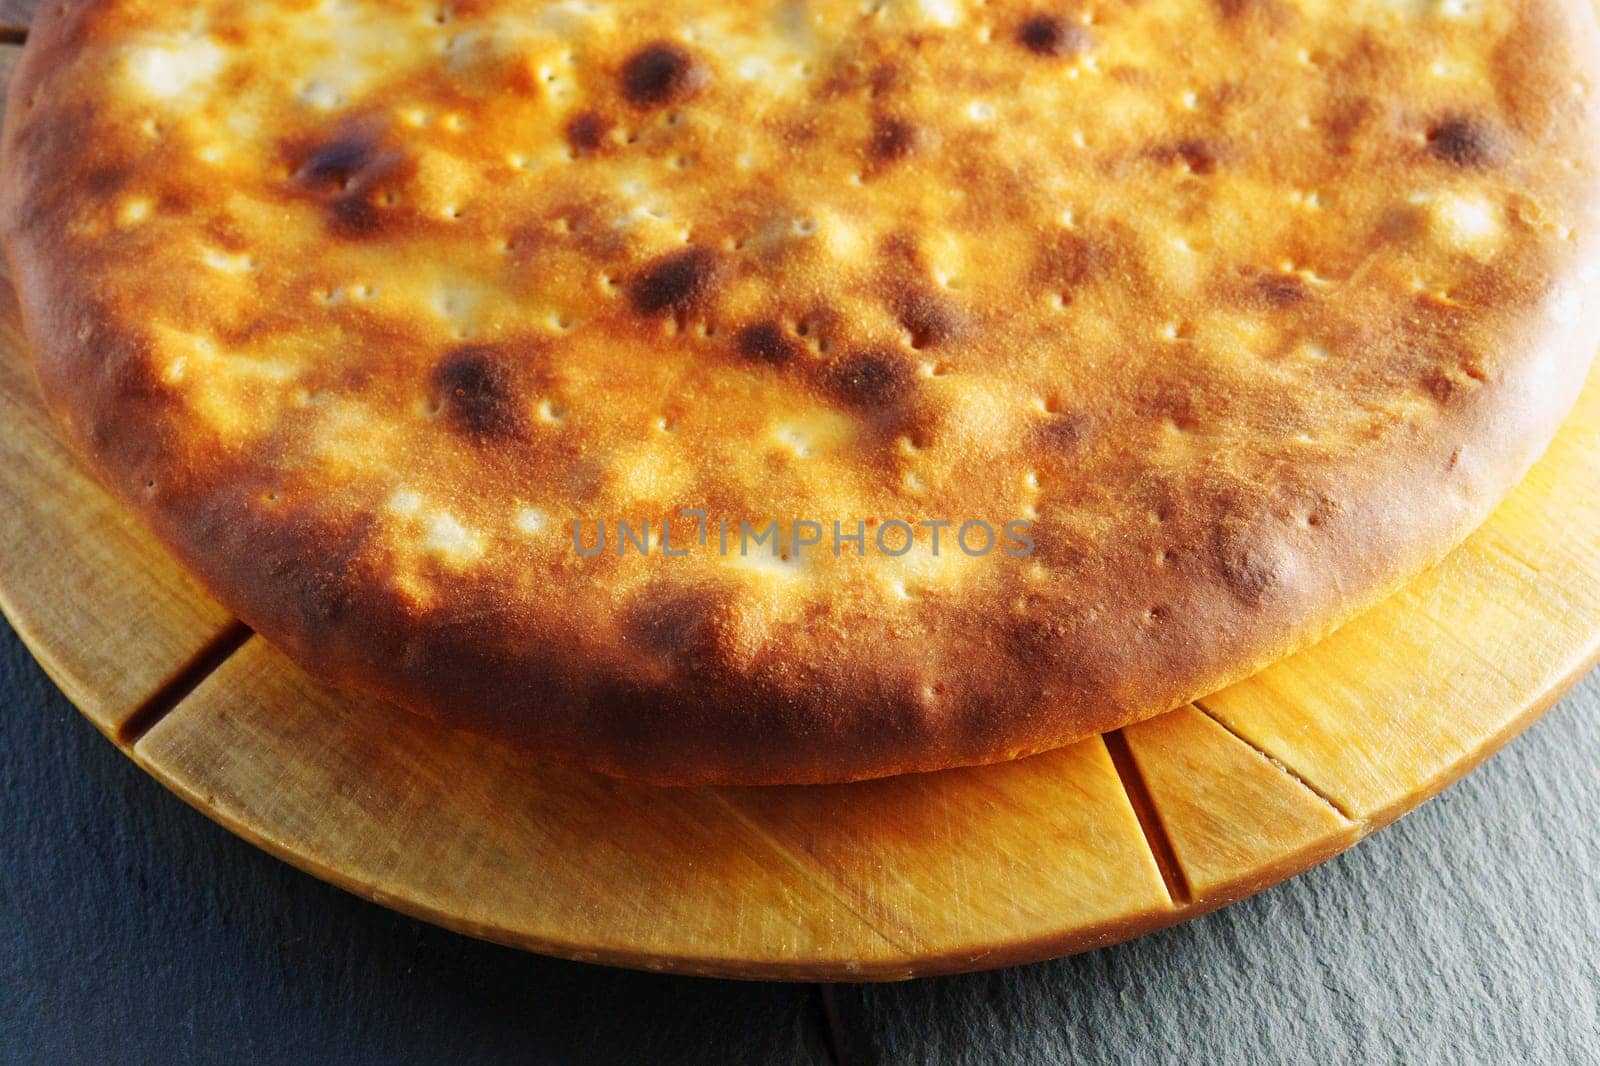 Tantalizing golden-brown crust freshly baked pie, close up